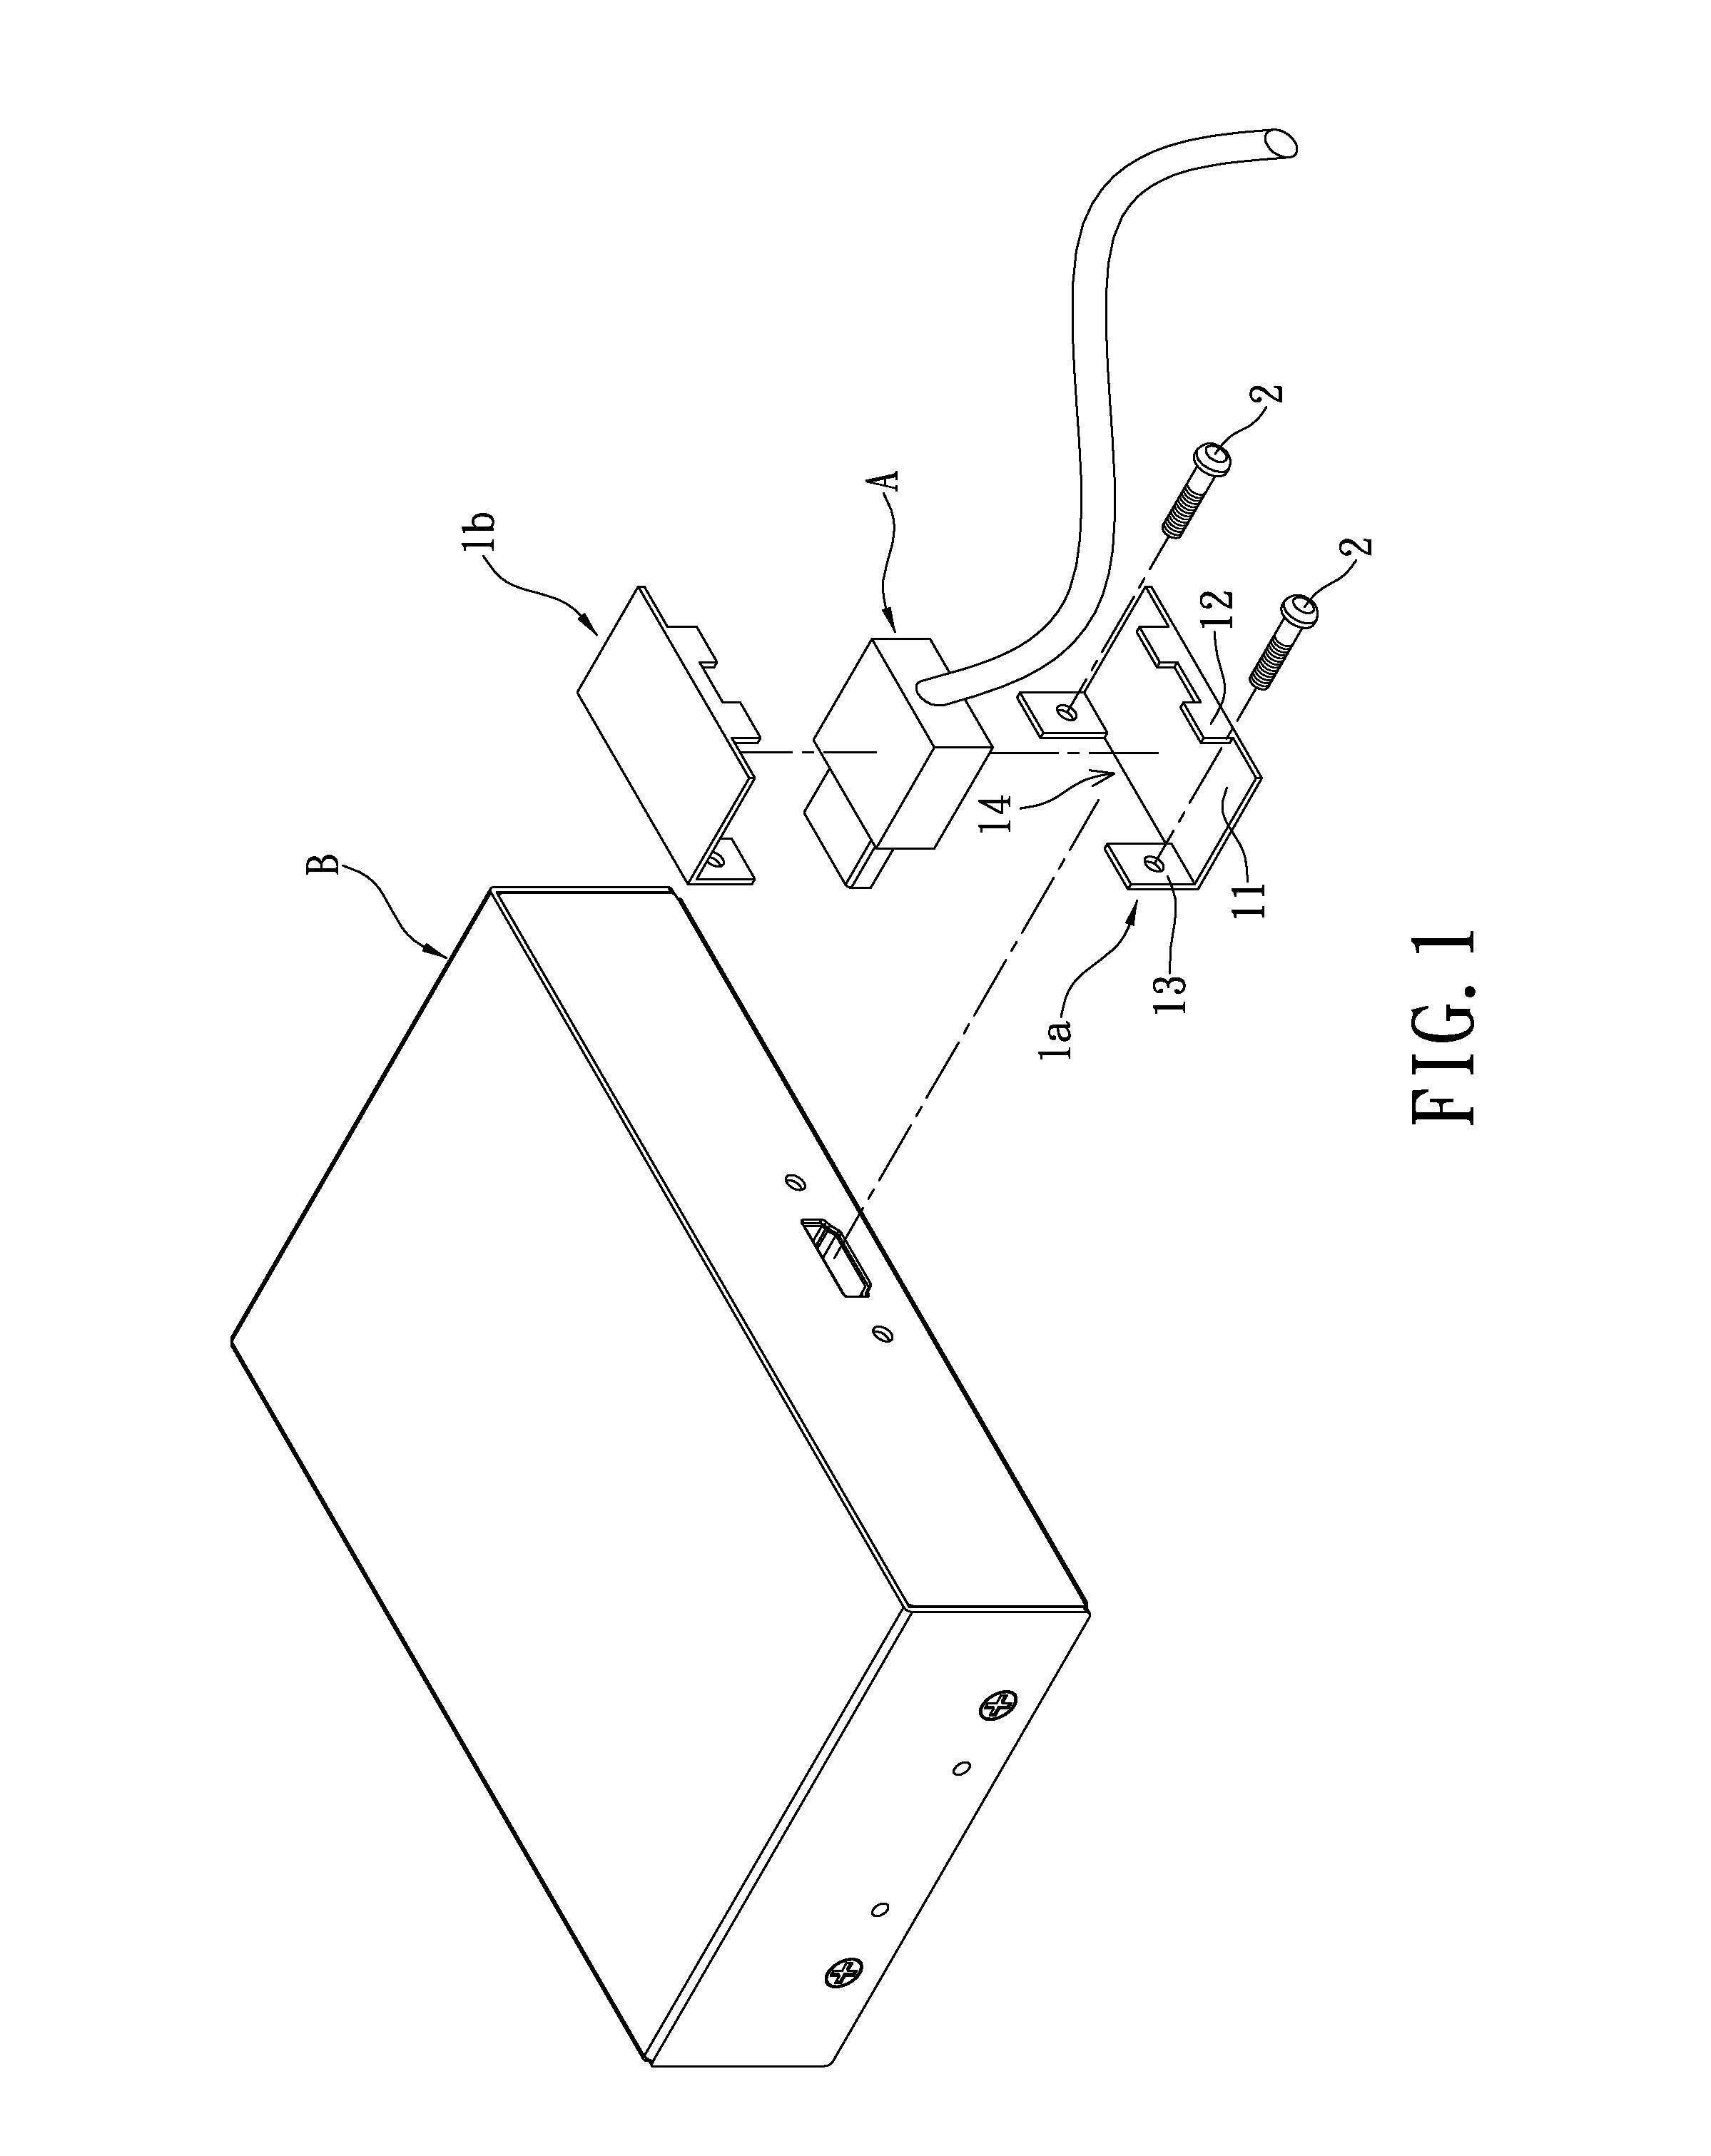 Connector retaining device